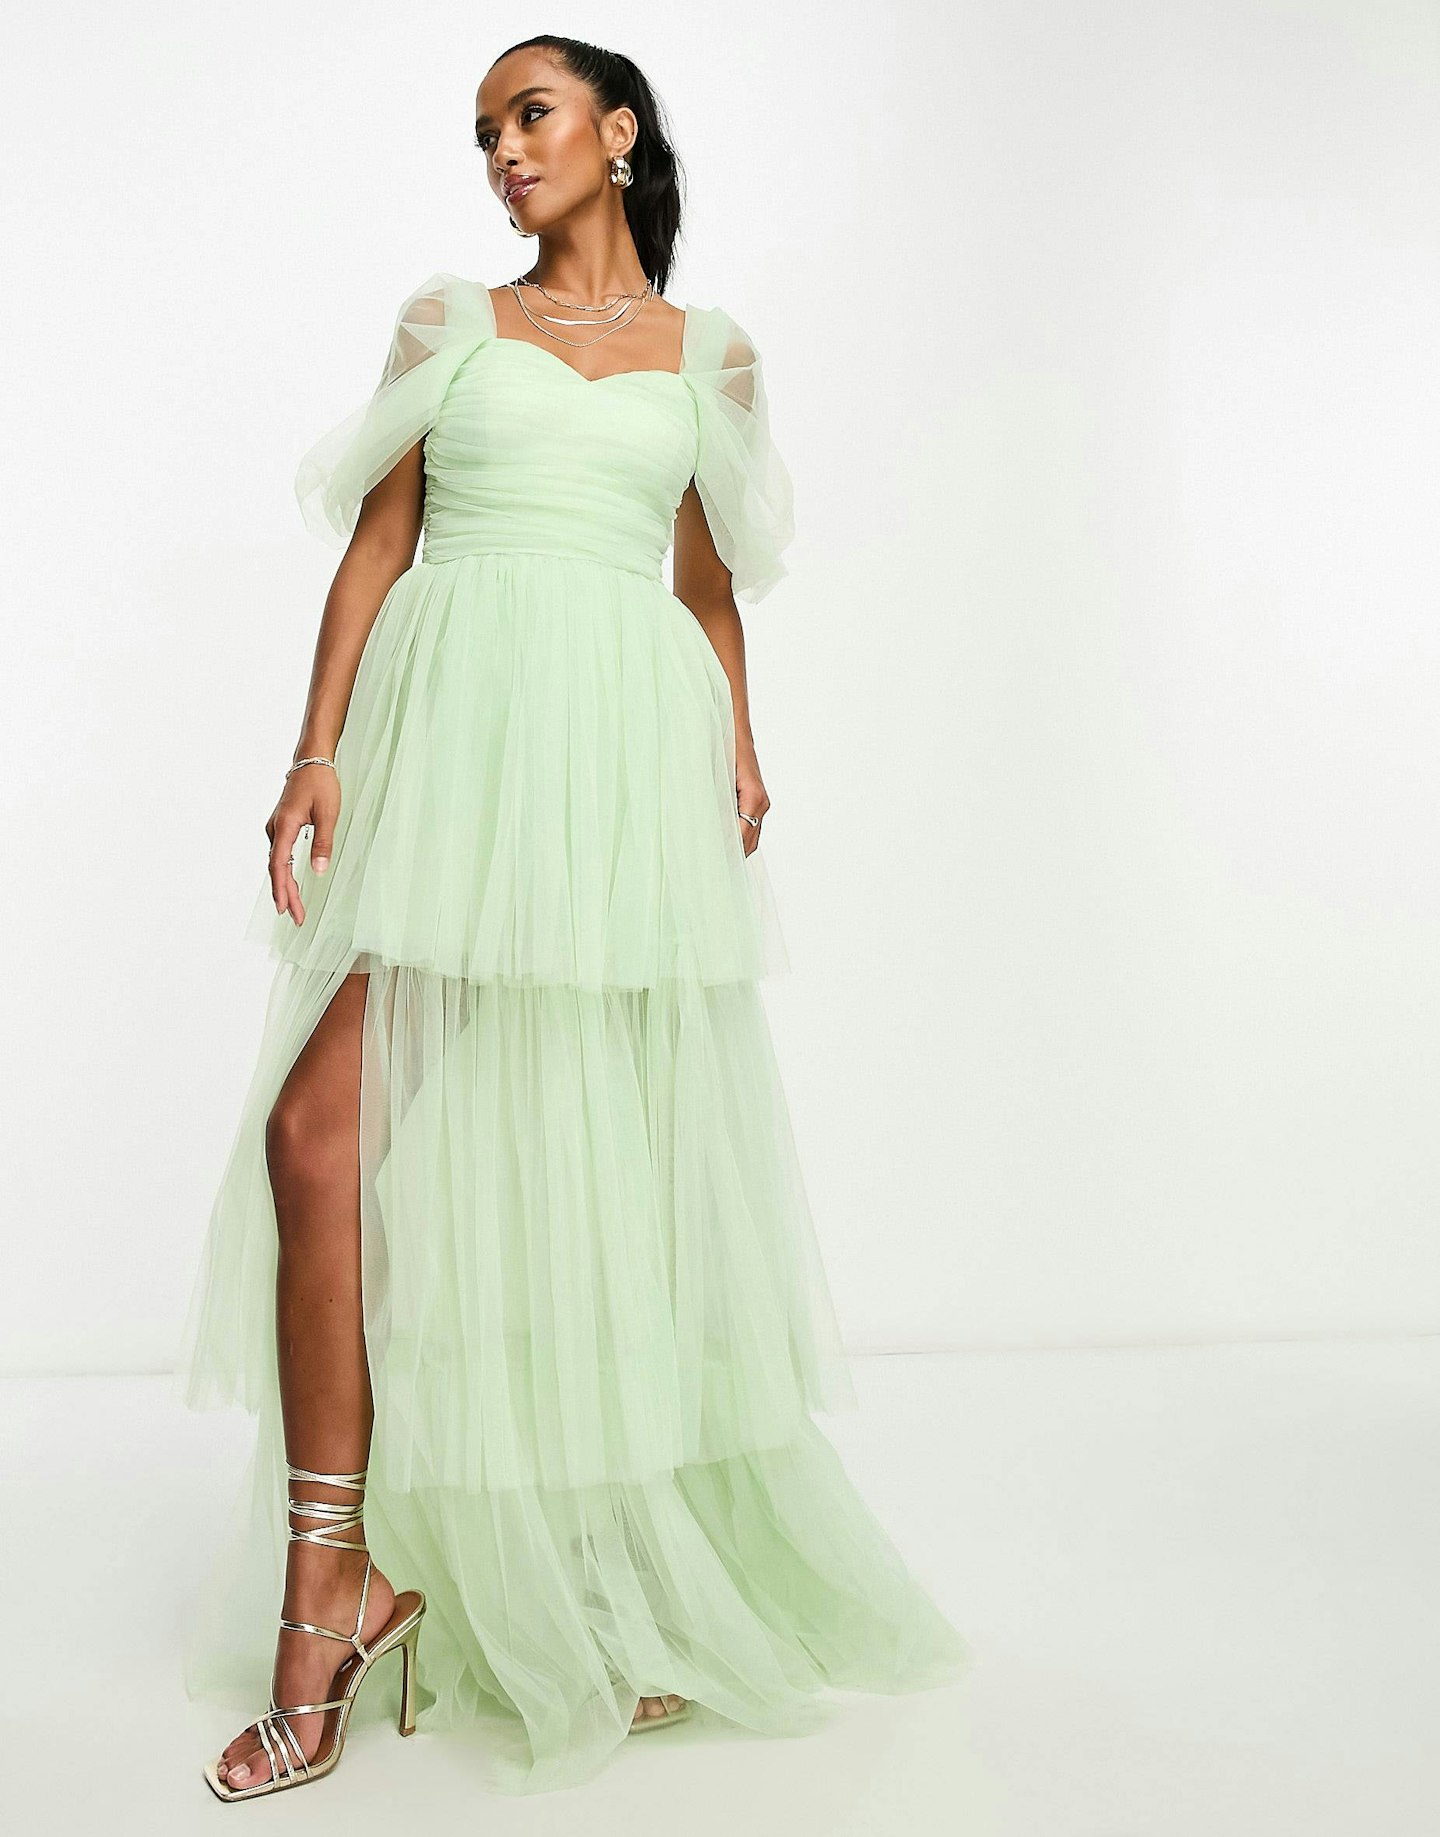 ASOS, Lace & Beads Petite Exclusive off Shoulder High Low Tulle Maxi Dress in Sage Green